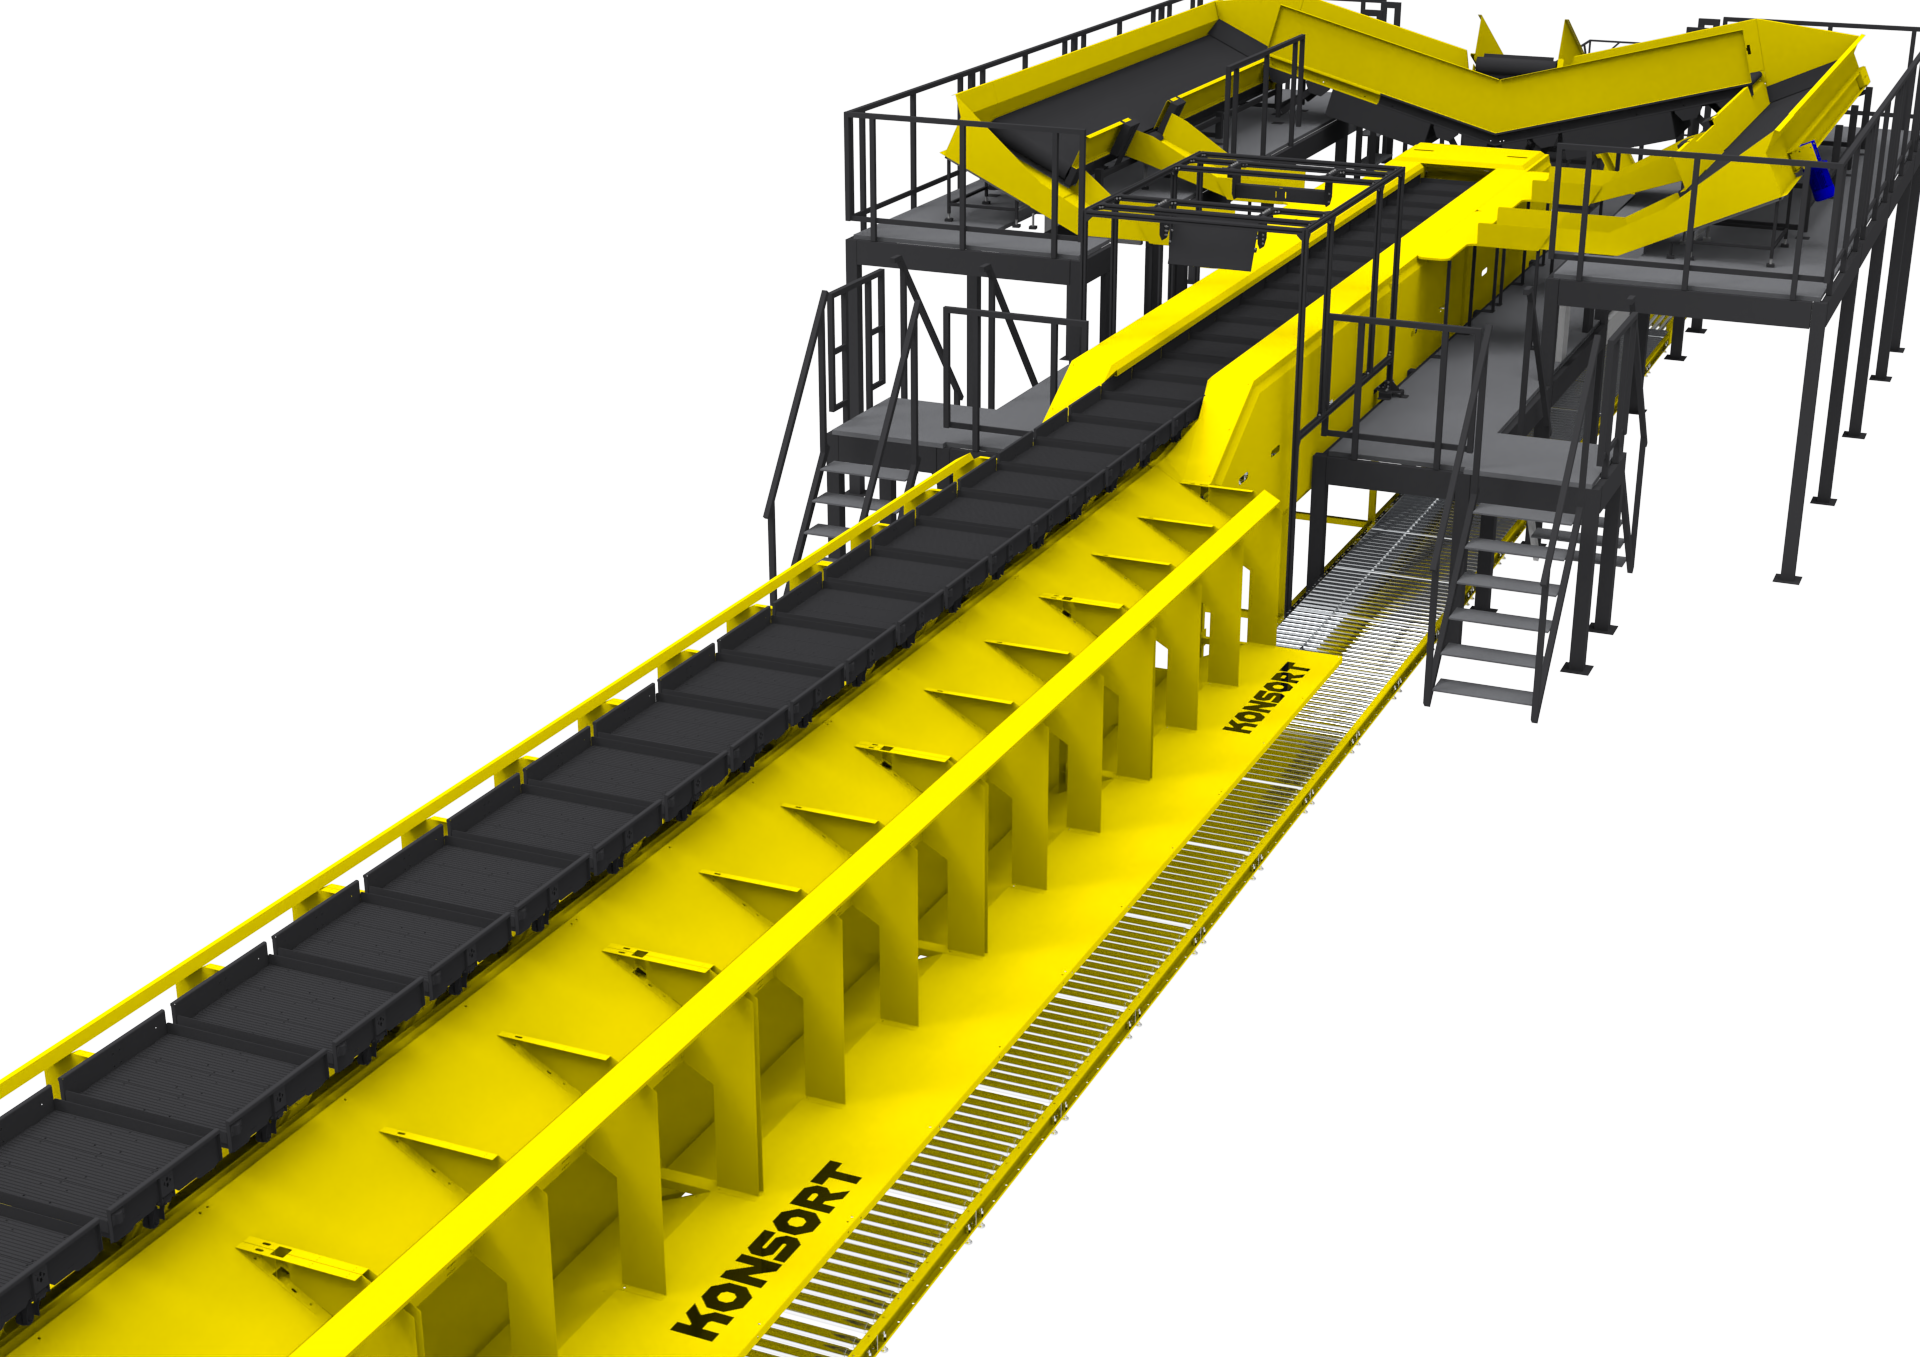 LR-sorter (modular sorting system with ductile trays)